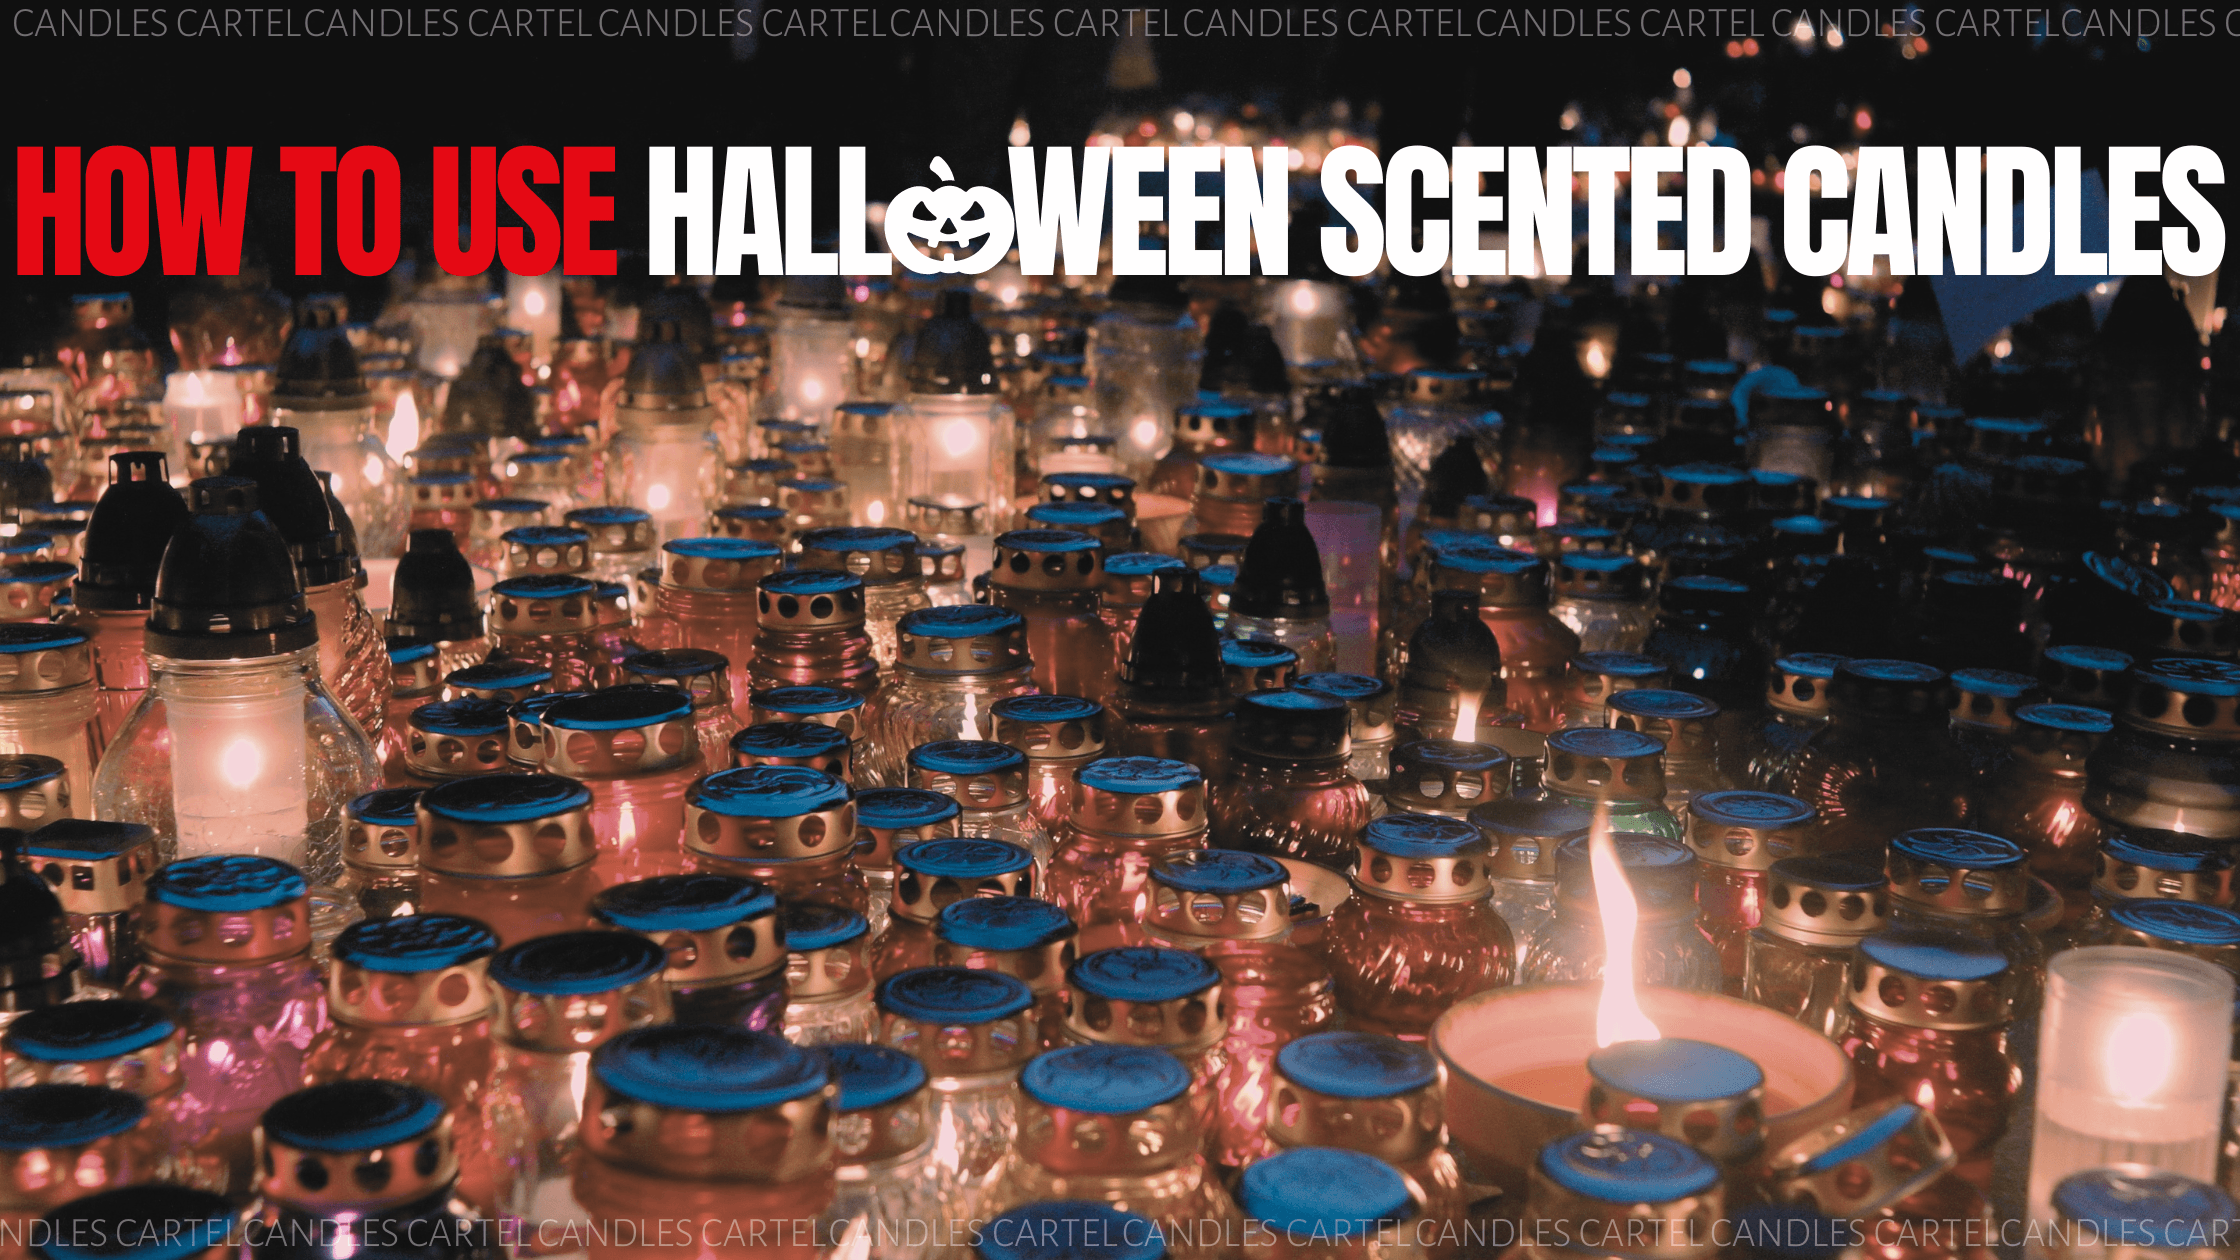 How To Use Halloween Scented Candles  - Blog Article